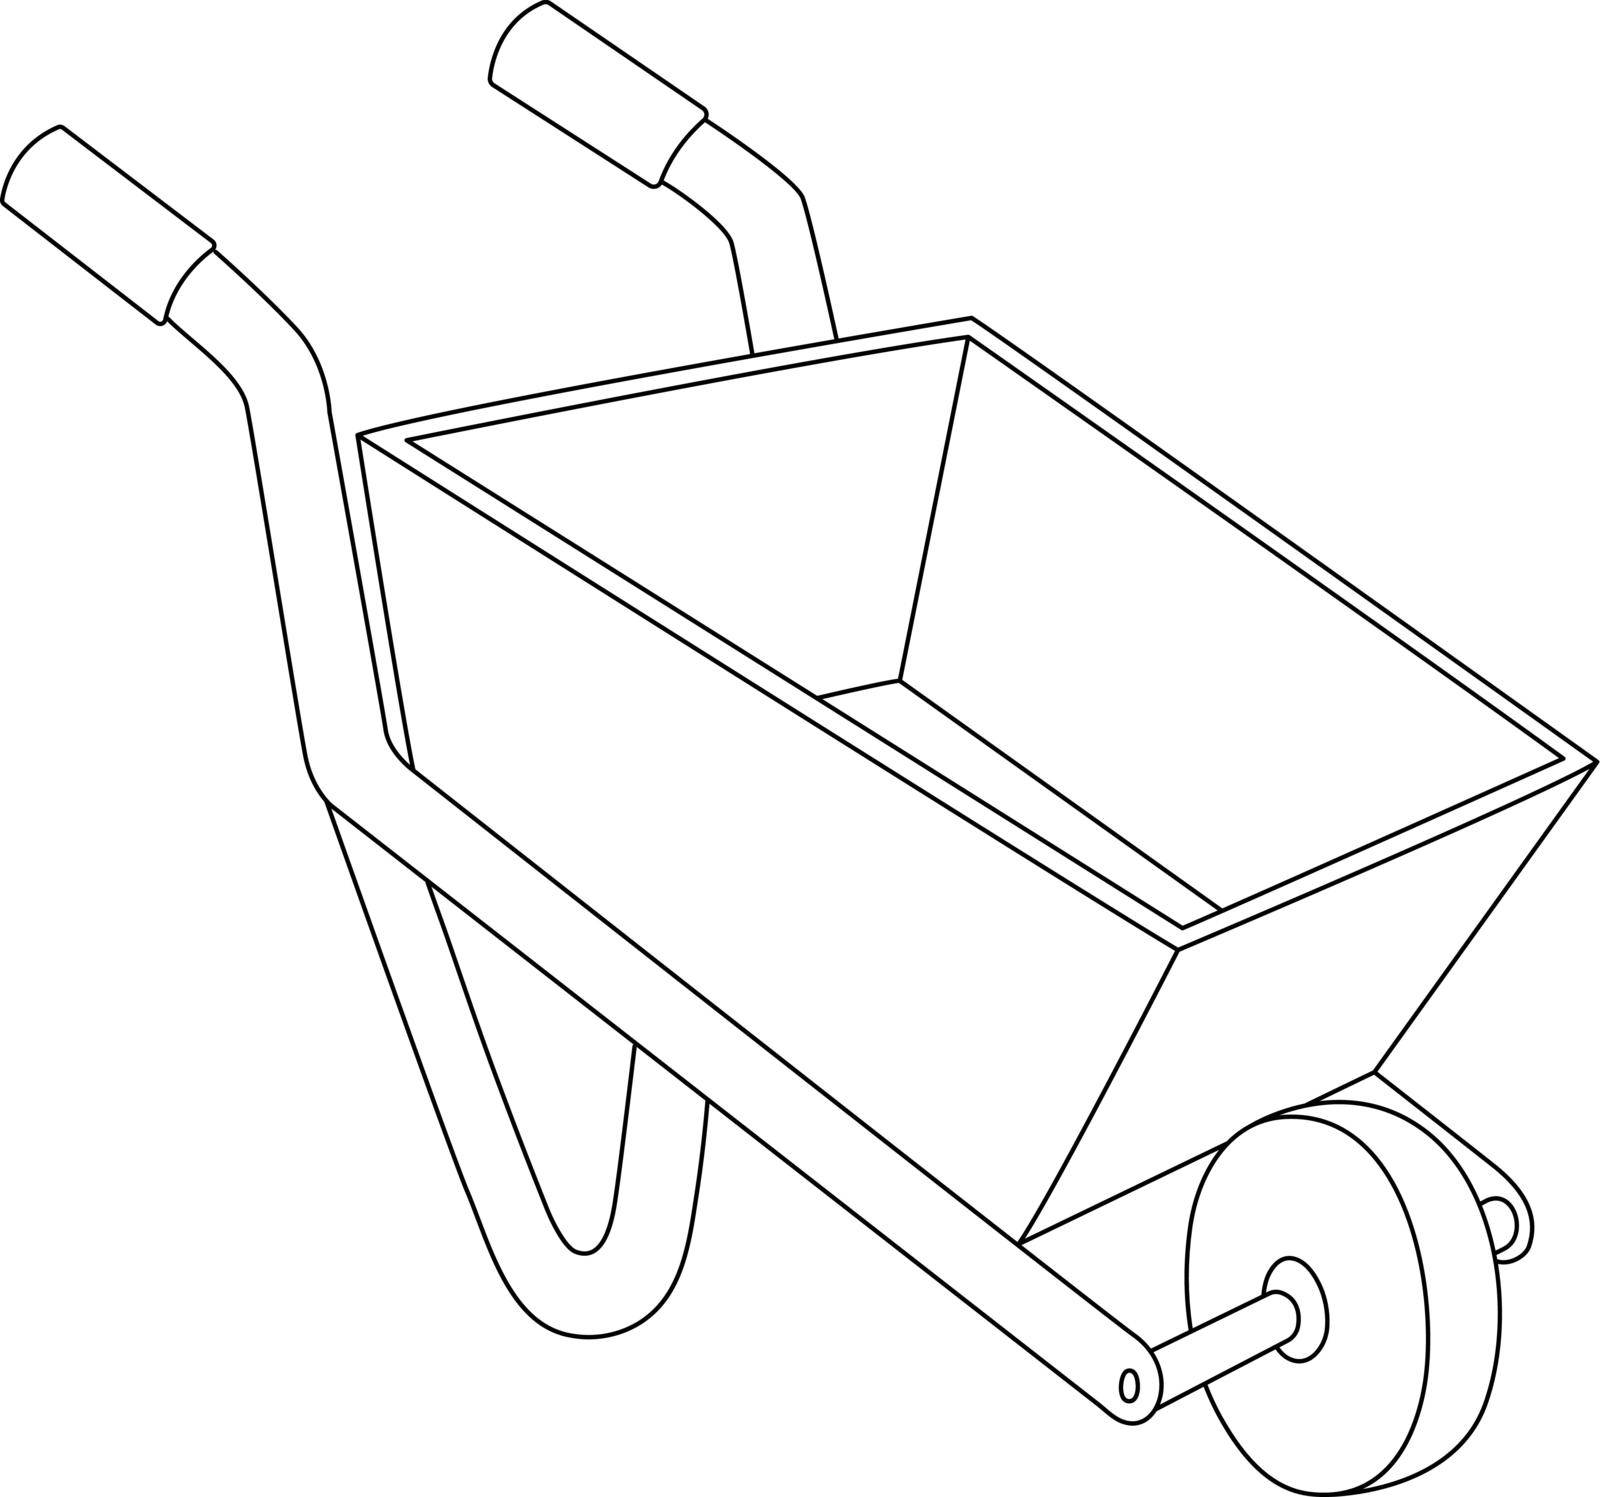 A cute and funny coloring page of a wheelbarrow. Provides hours of coloring fun for children. To color, this page is very easy. Suitable for little kids and toddlers.